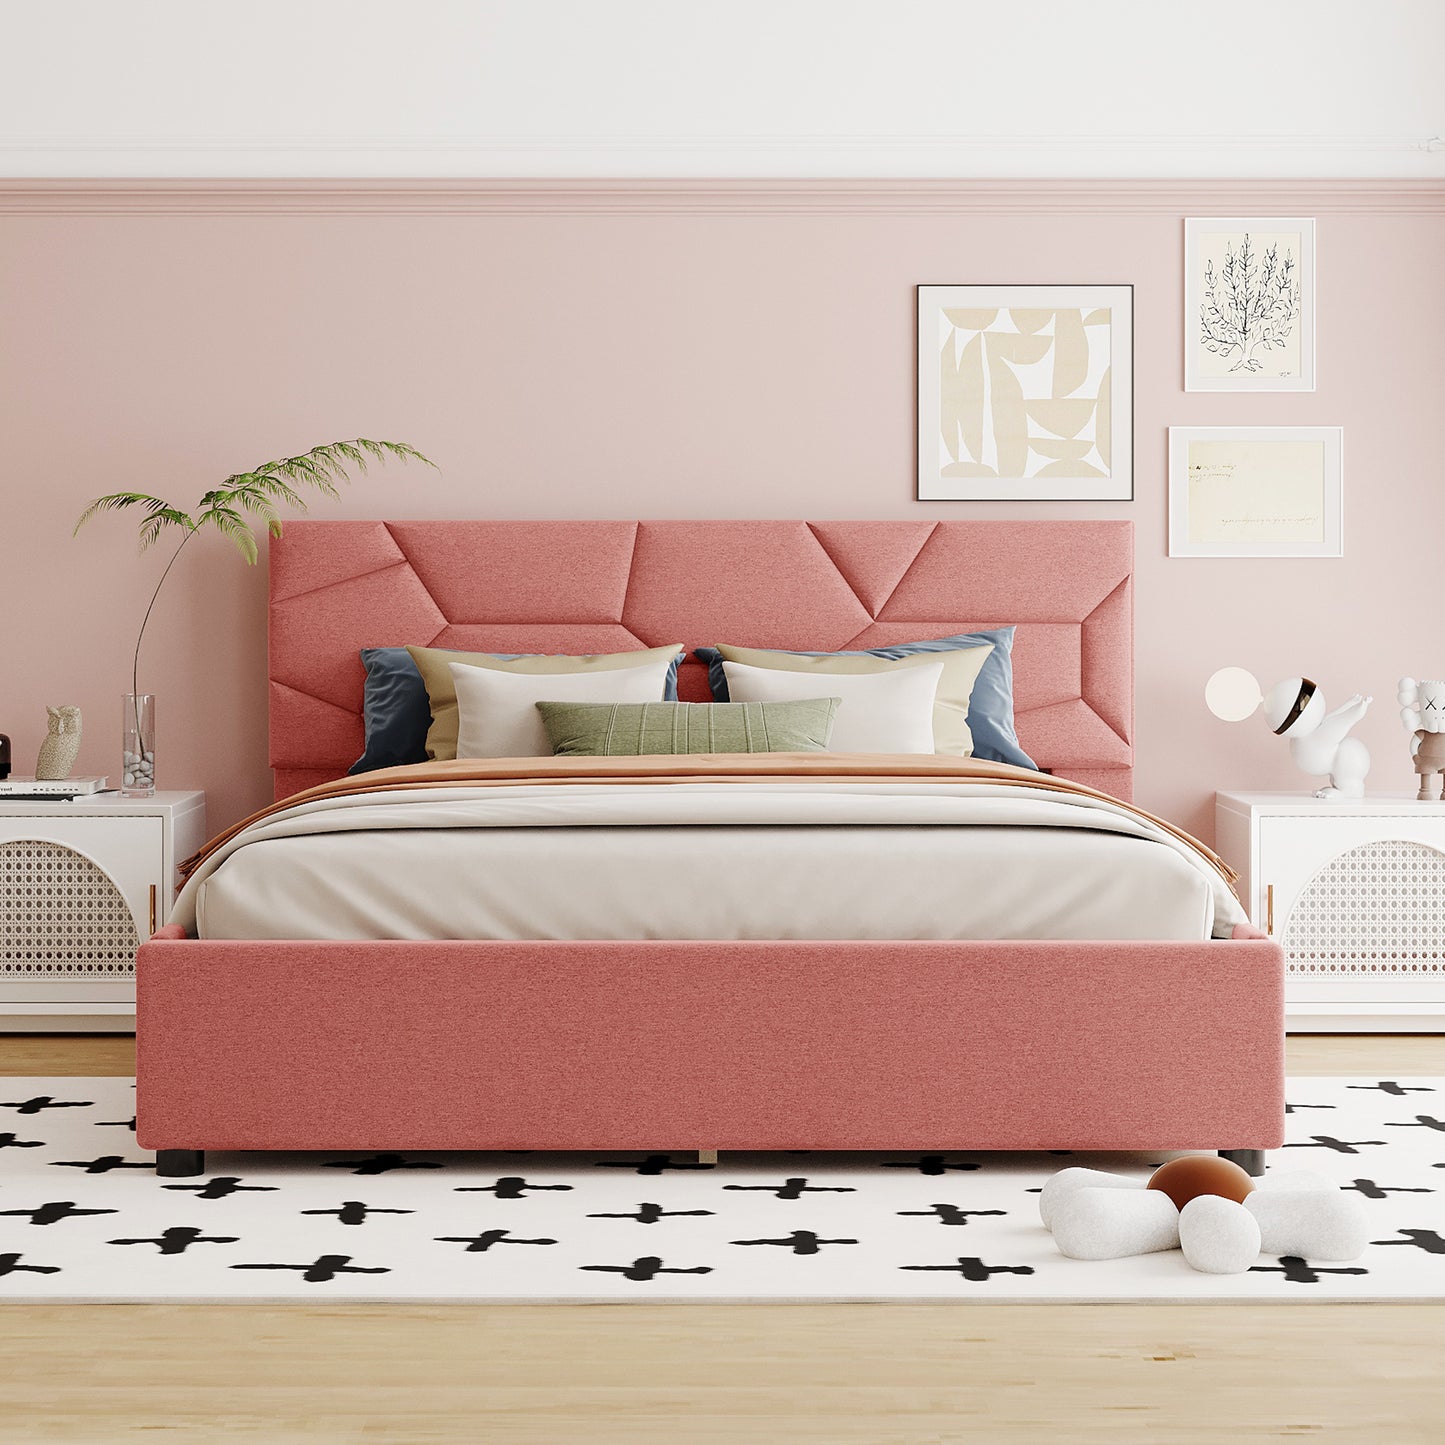 Full Size Storage Bed with 4 Drawers, BTMWAY Full Size Upholstered Platform Bed with Headboard Brick Pattern for Bedroom, Contemporary Storage Full Bed Frame 4 Storage Drawers Bed, Pink